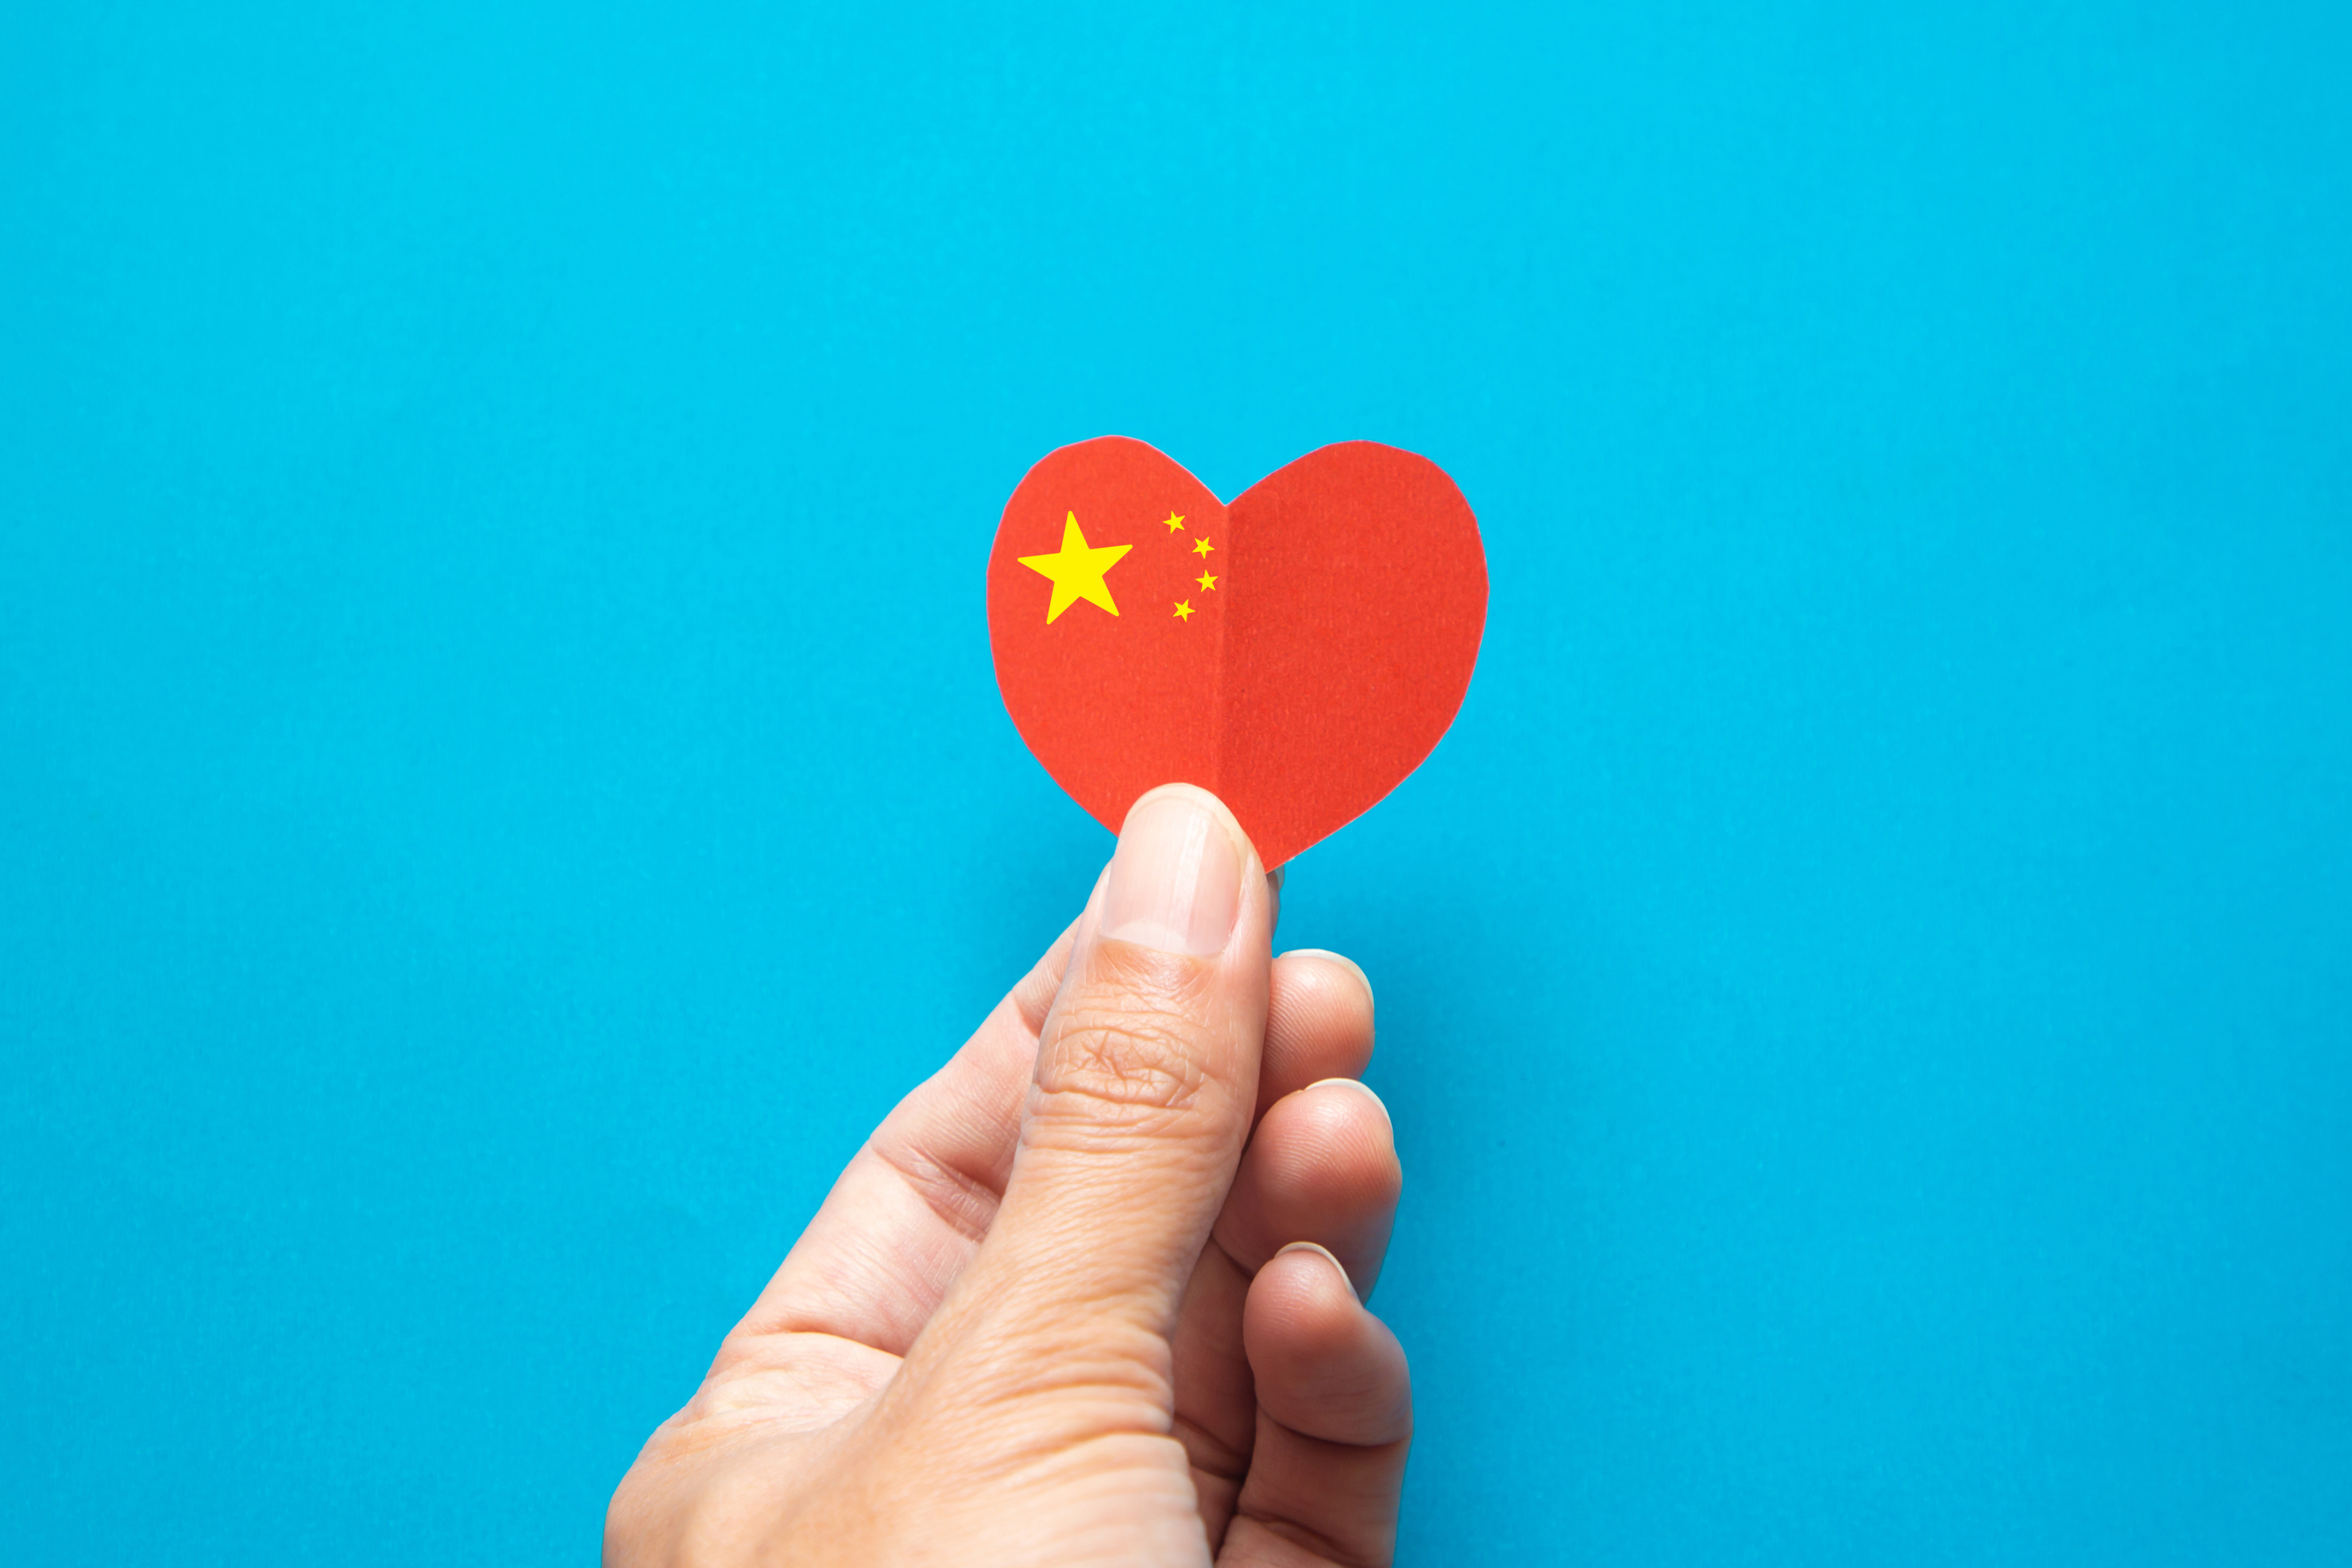 Tens of thousands of charities and NGOs in China that have been battered by the Covid-19 pandemic, fundraising restrictions and .Photo: Shutterstock Images